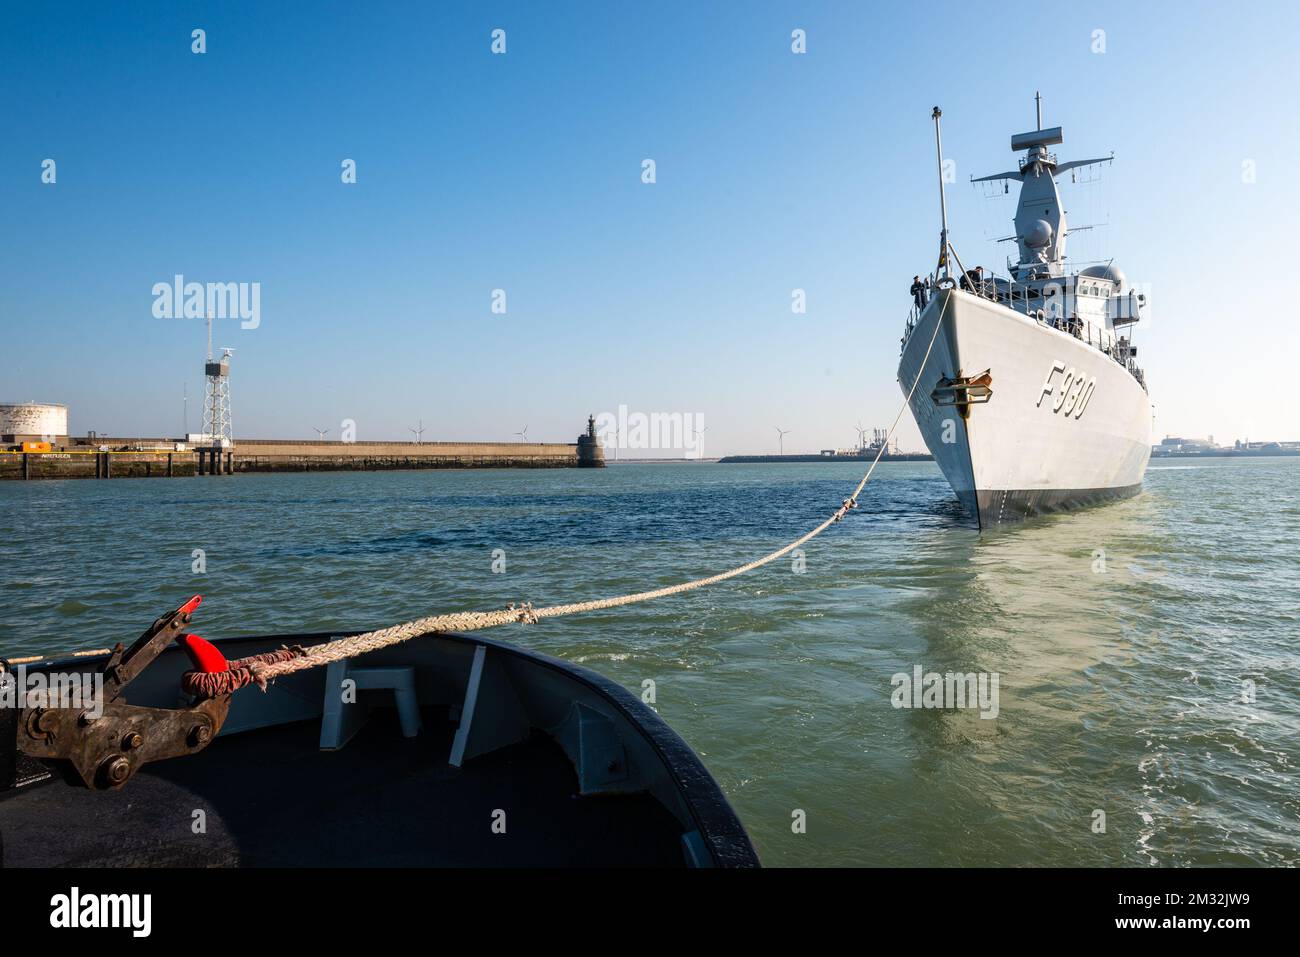 ATTENTION EDITORS - HAND OUT PICTURES - EDITORIAL USE ONLY - MANDATORY CREDIT HANDOUT DEFENSIE - DEFENCE TBN JORN URBAIN Illustration picture shows the arrival of Belgian frigate Leopold 1 in Zeebrugge, Friday 27 March 2020. One of the sailors on the frigate has a confirmed Corona virus infection and has left the ship earlier. Due to the strict measures following such an infection, the ship has returned earlier from its mission and all non-infected sailors must now stay in home quarantine. BELGA PHOTO HANDOUT DEFENSIE - DEFENCE TBN JORN URBAIN  Stock Photo